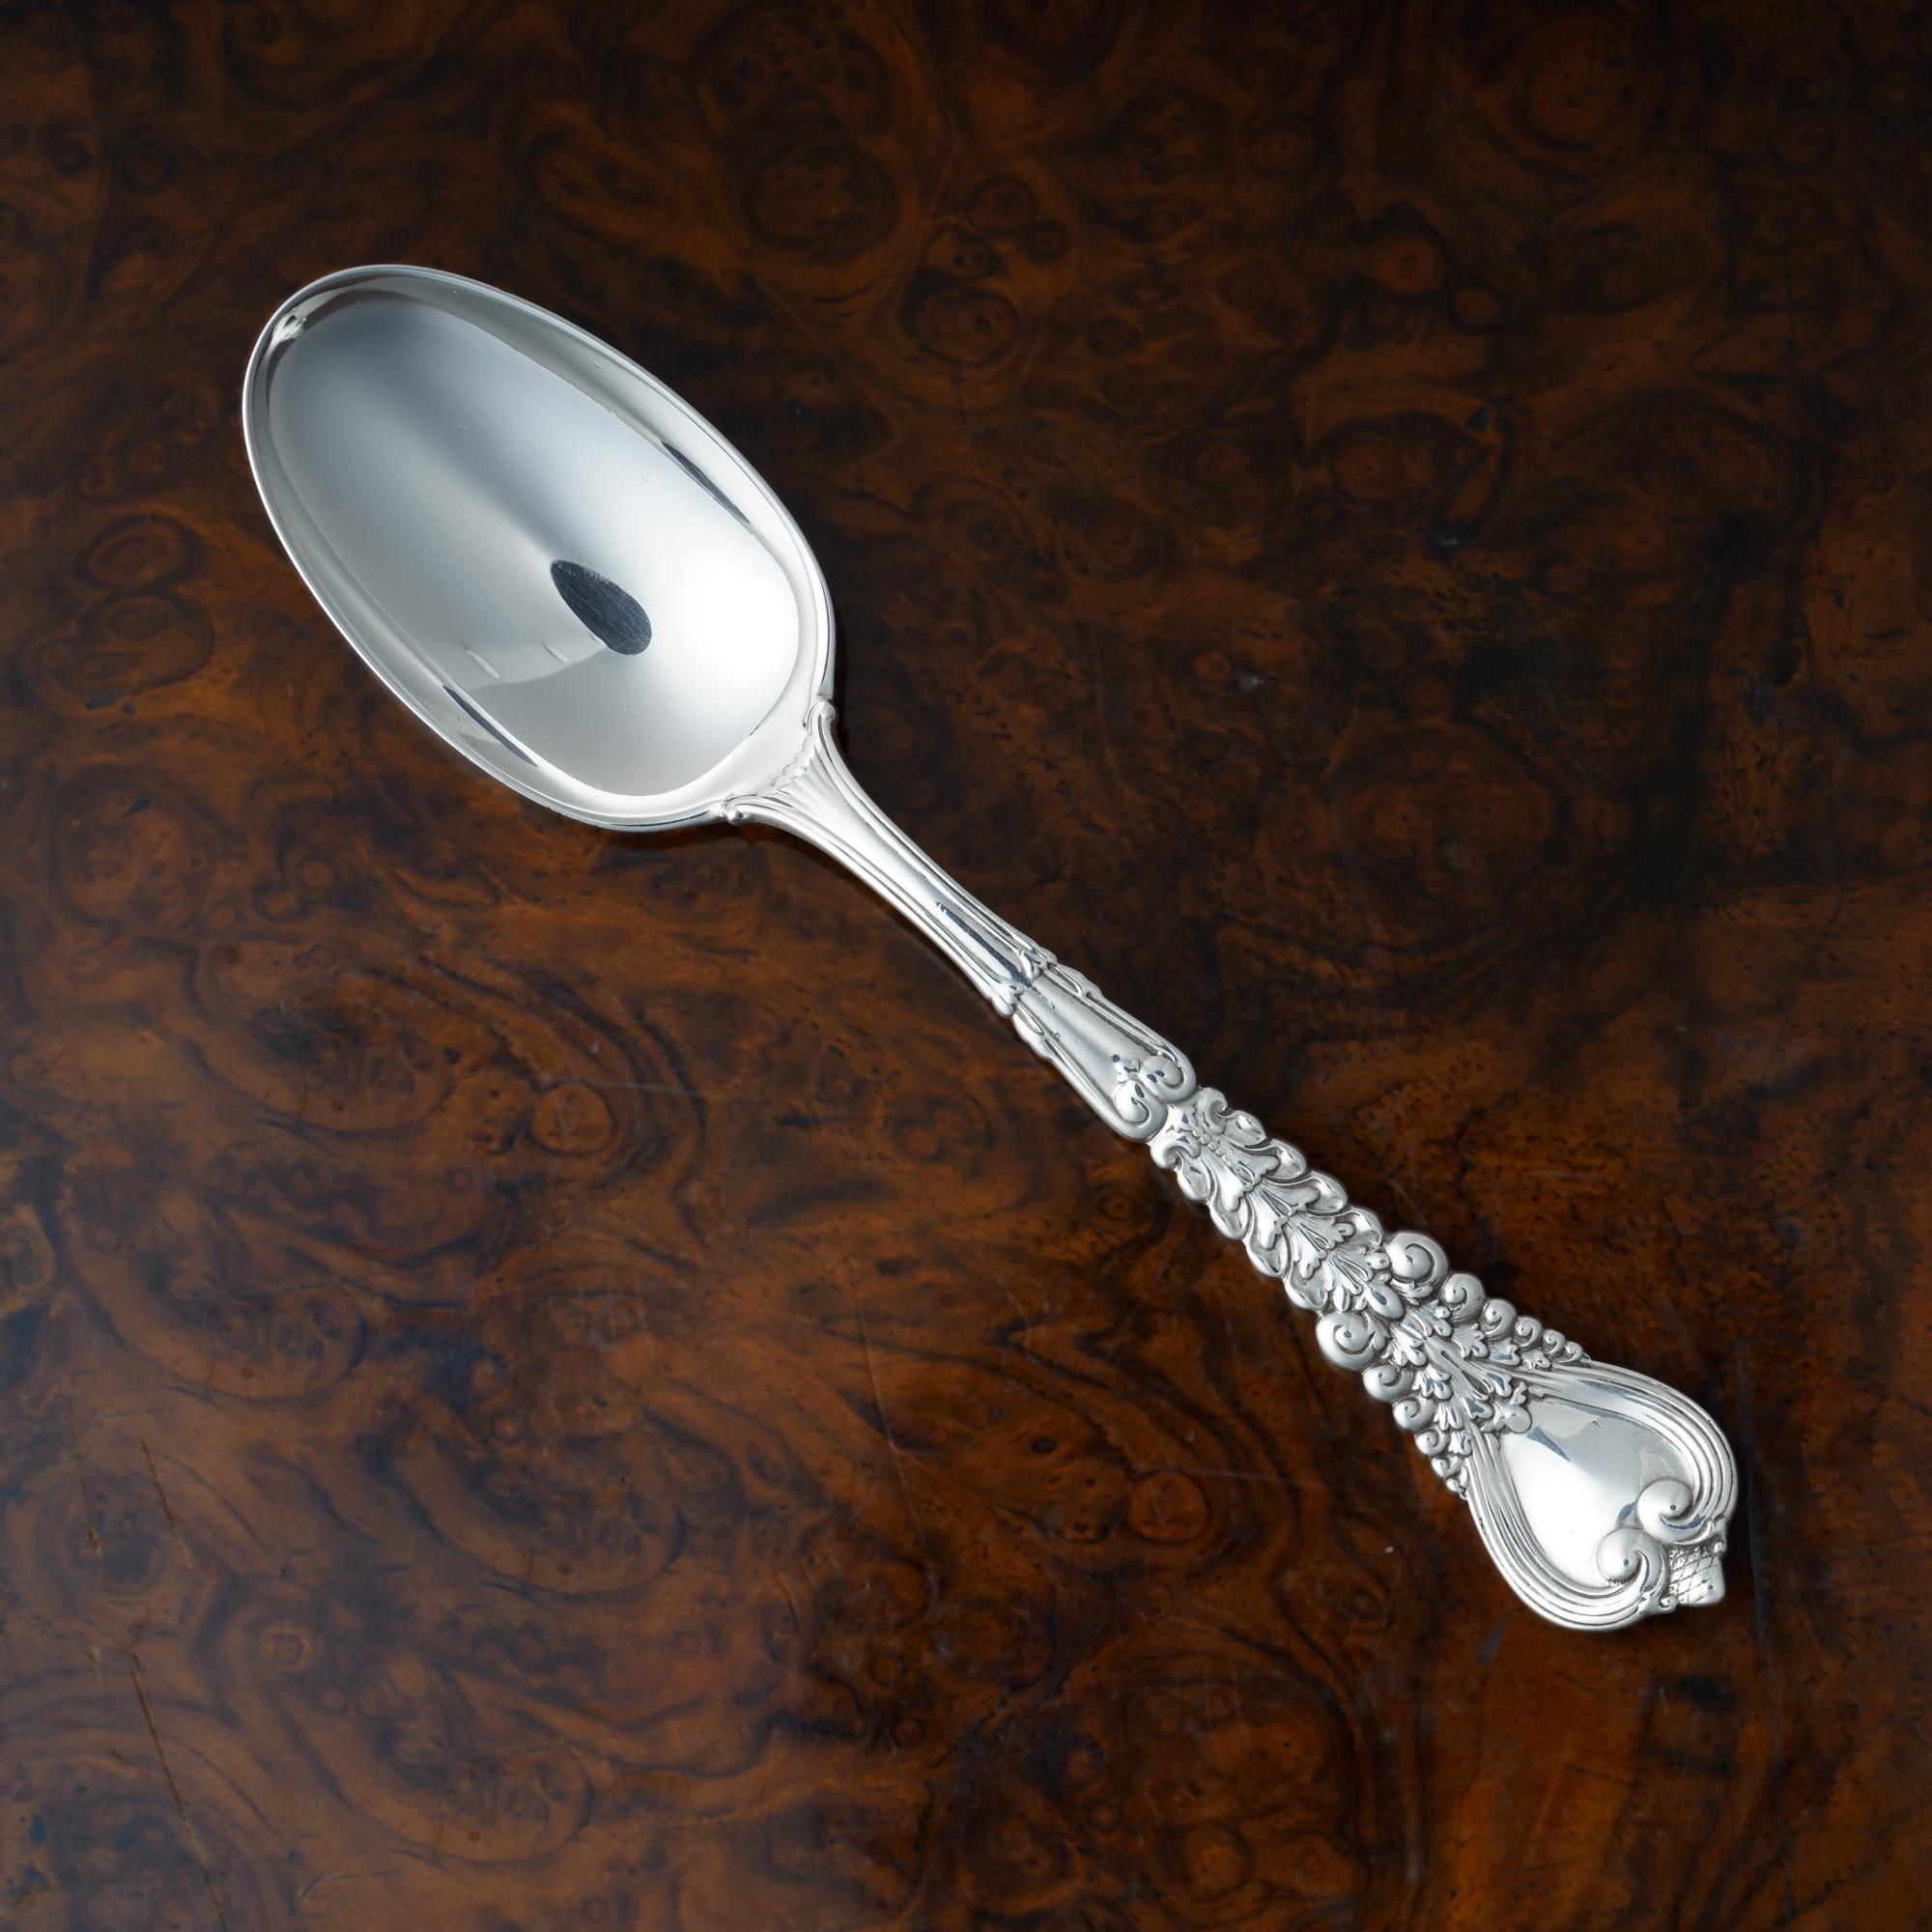 Antique Tiffany & Co. sterling silver Florentine pattern teaspoon

Maker: Tiffany & Co
Pattern: Designed by Paulding Farnham
Style: Renaissance Revival
Introduced 1900, but the patent application not filed until May 9, 1904, issued June 7,